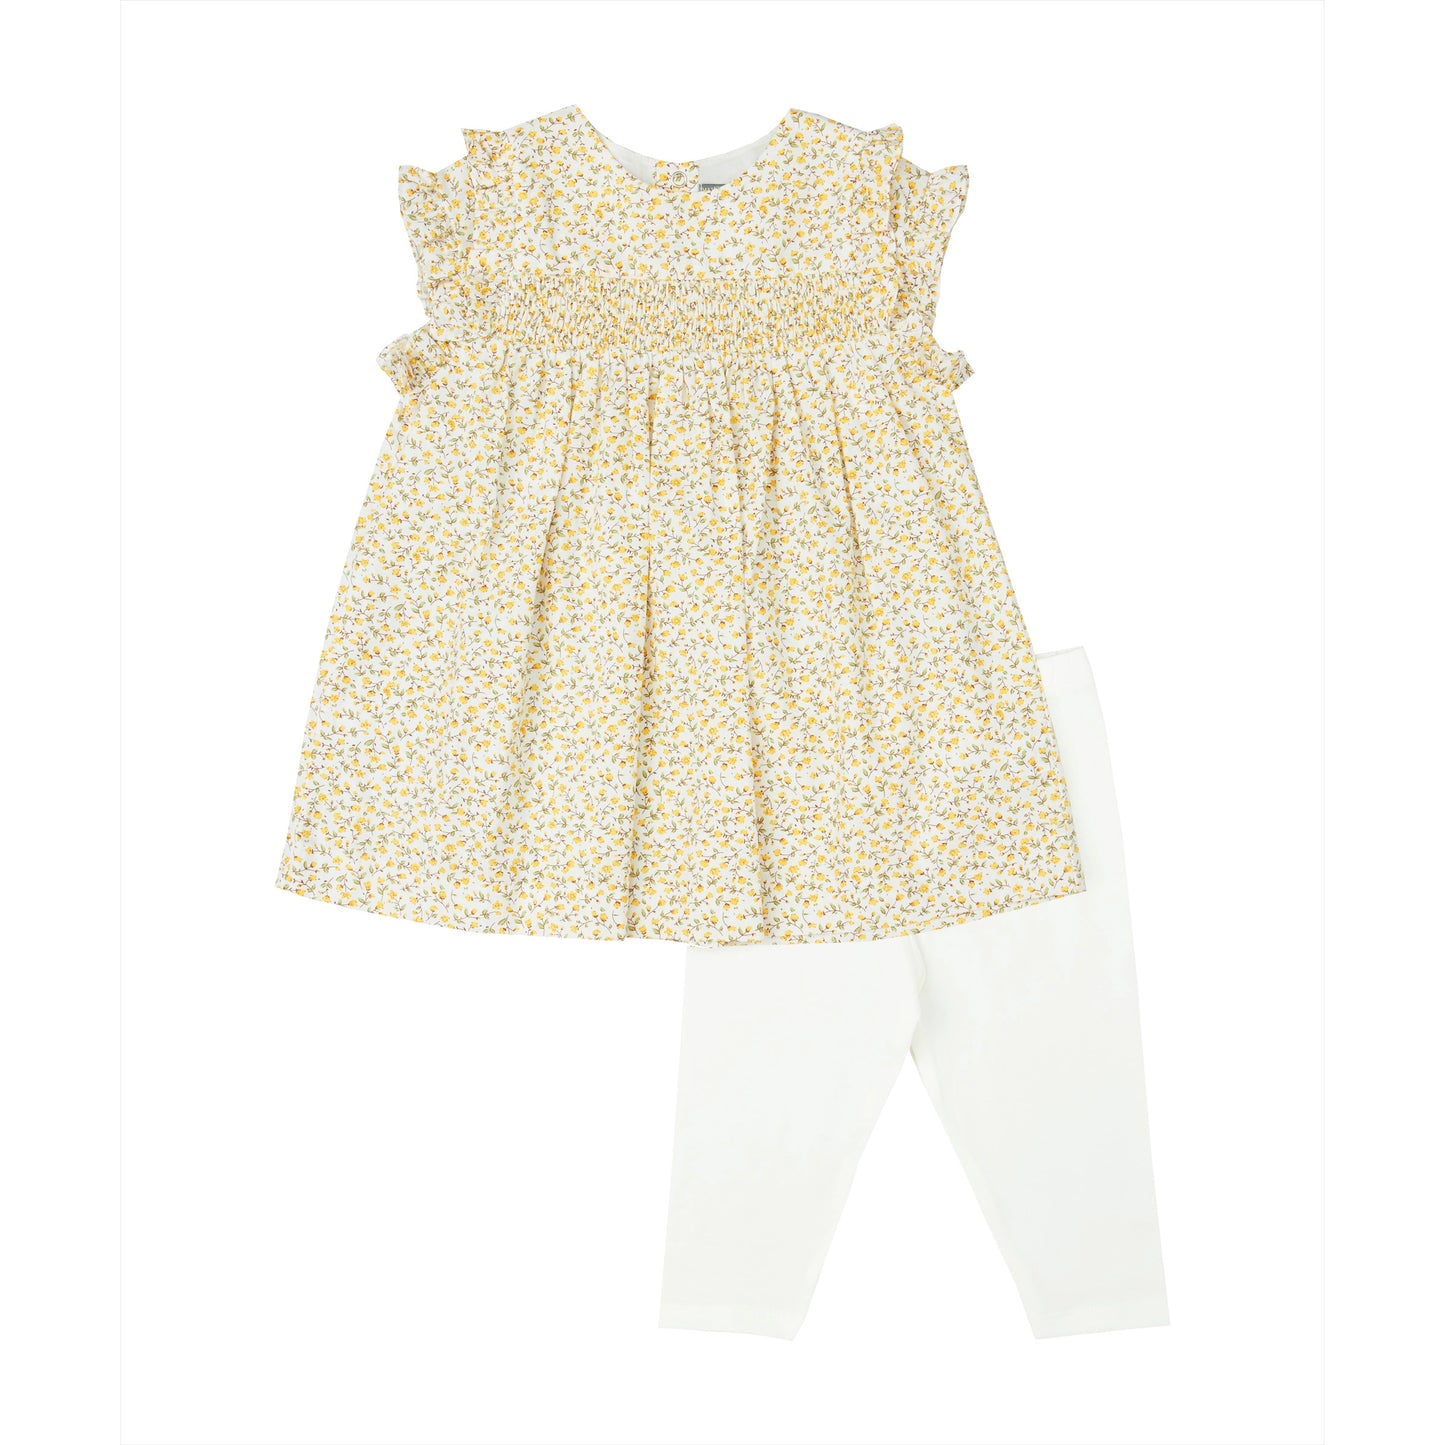 two piece baby girl sets. Top is a yellow floral tunic with matching off-white leggings.